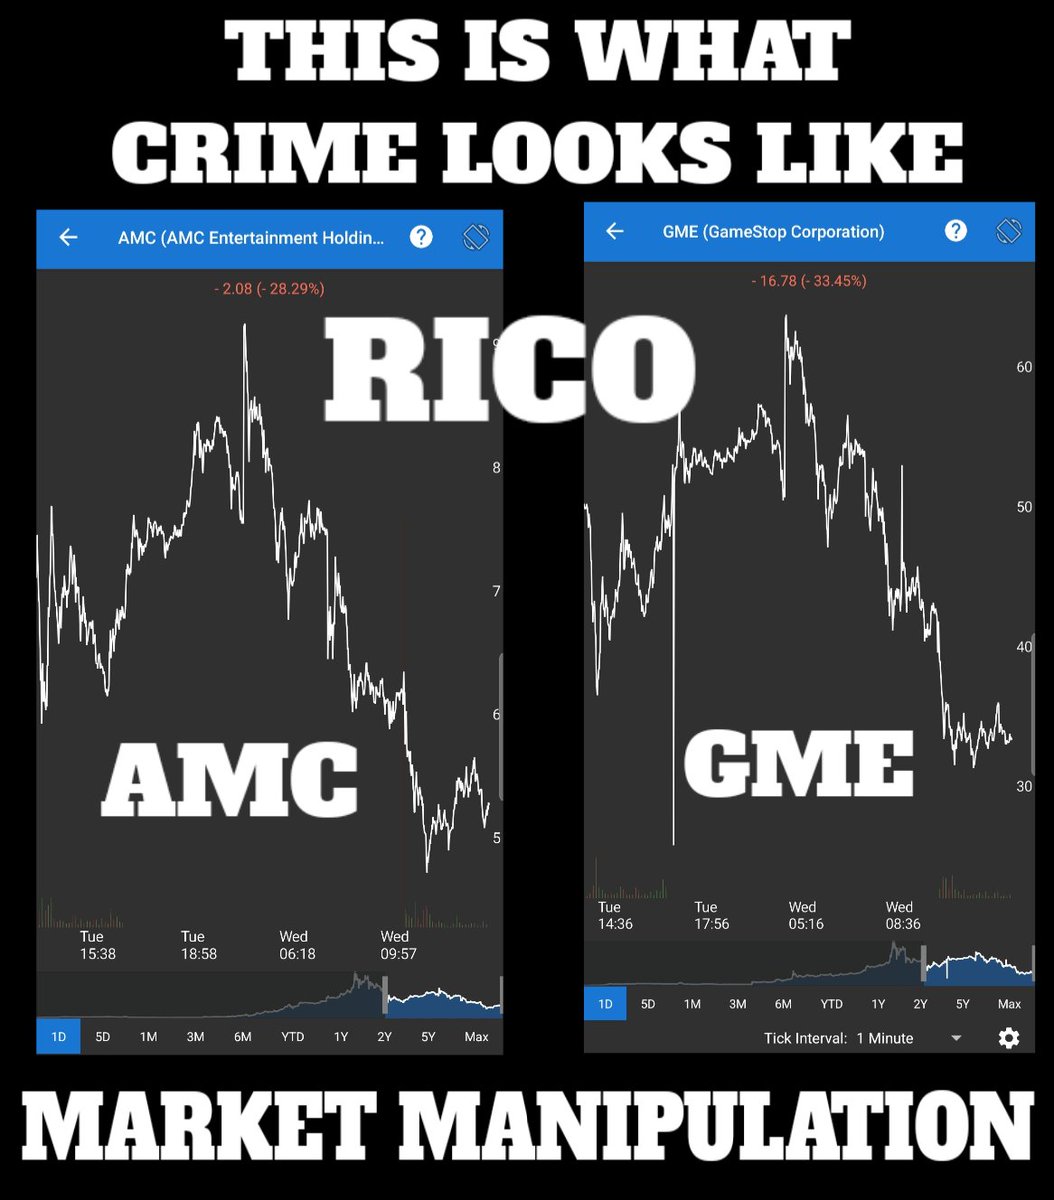 This is pure crime. They have weaponizing halts. This is not normal price action.
They have had their algorithms busy naked shorting and selling securities they don't own and can't deliver. They are all in on it Regulators, Brokers, Politicians and Market Participants can you say